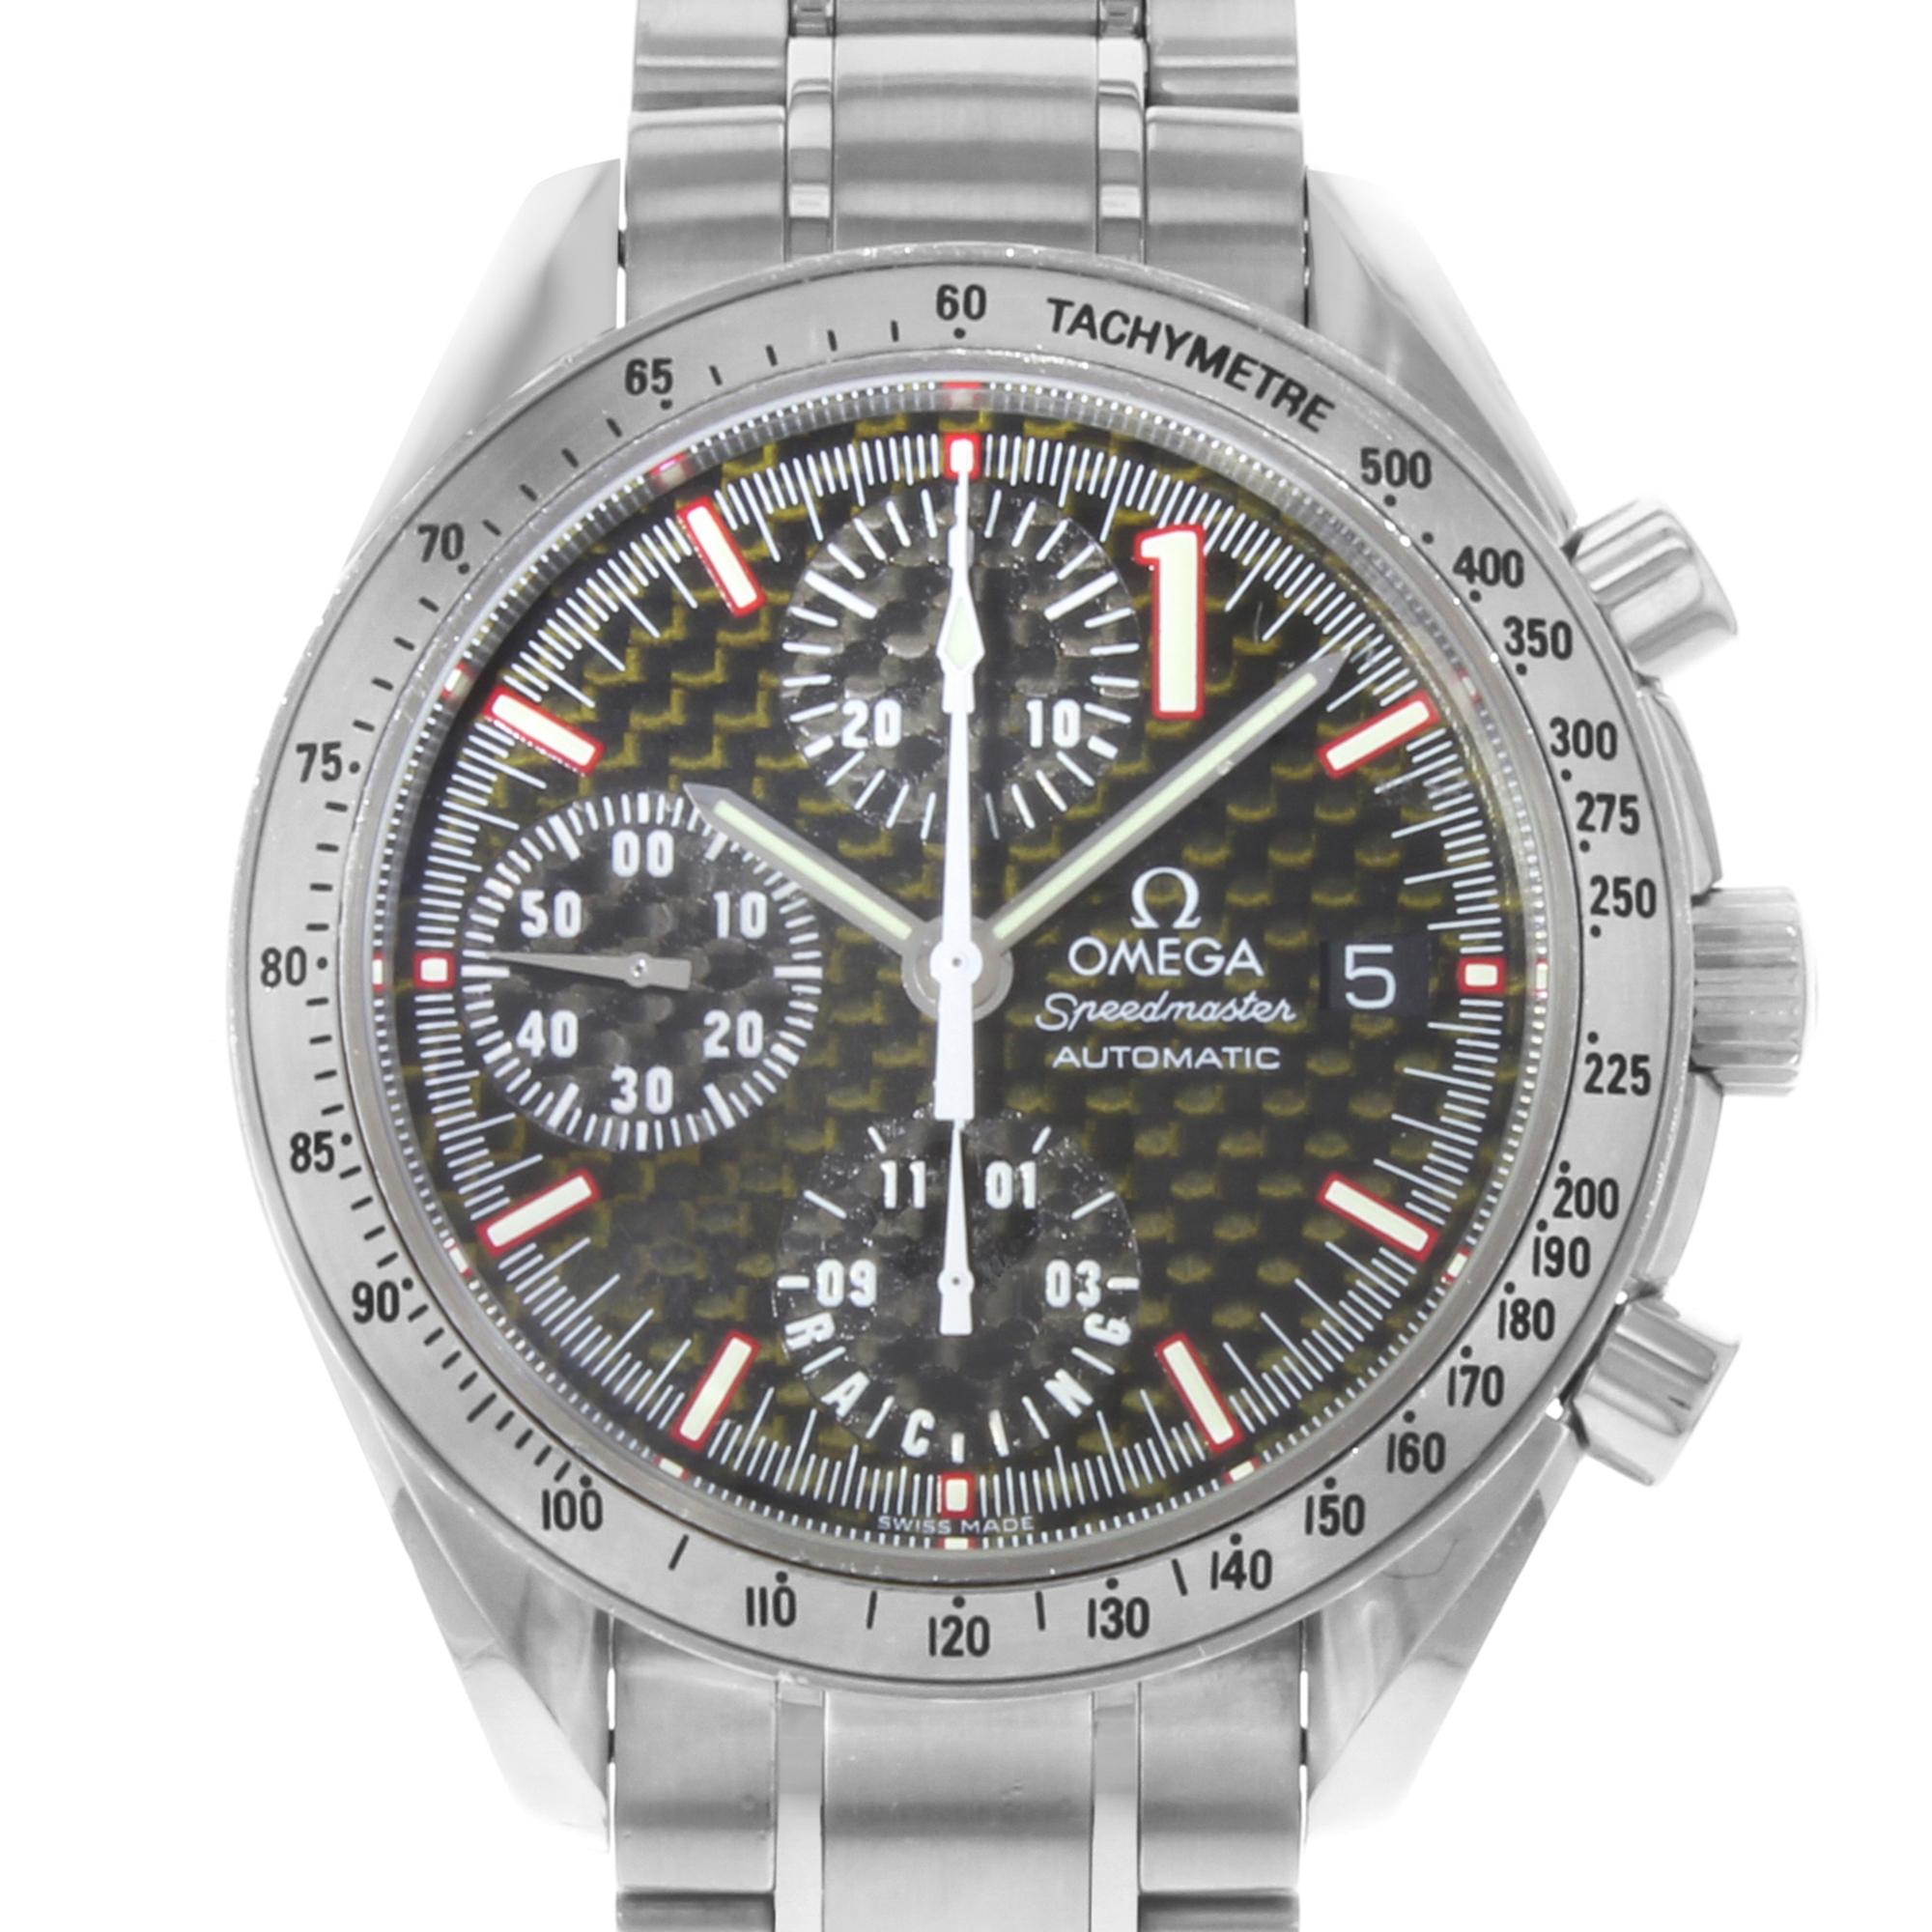 This pre-owned Omega Speedmaster  3519.50.00 is a beautiful men's timepiece that is powered by mechanical (automatic) movement which is cased in a stainless steel case. It has a round shape face, chronograph, date indicator, small seconds subdial,